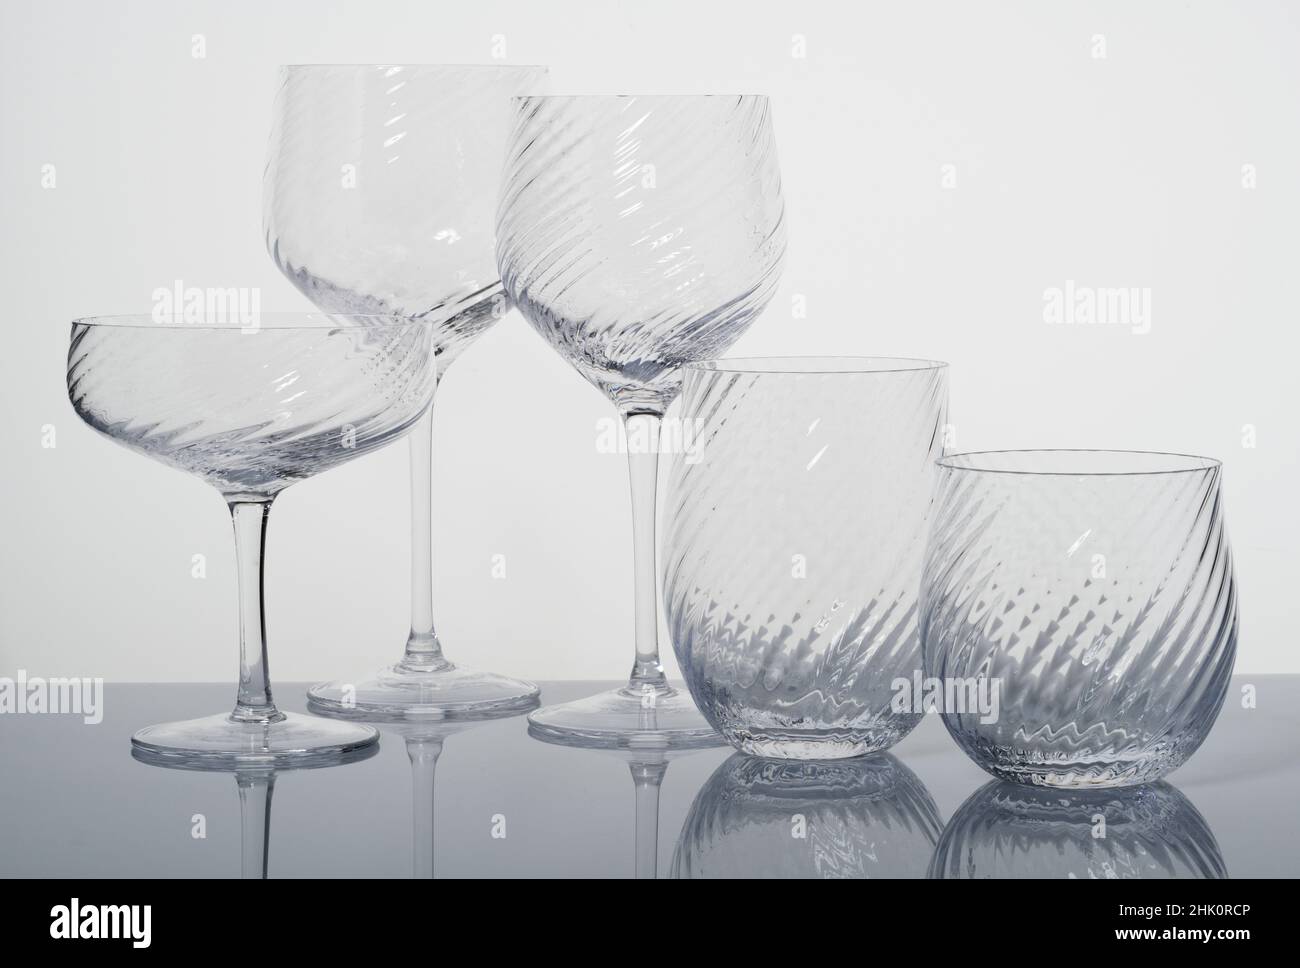 A set of glassware. Drinking vessels or drinkware. Domestic glasses for drinking liquids from. Stock Photo